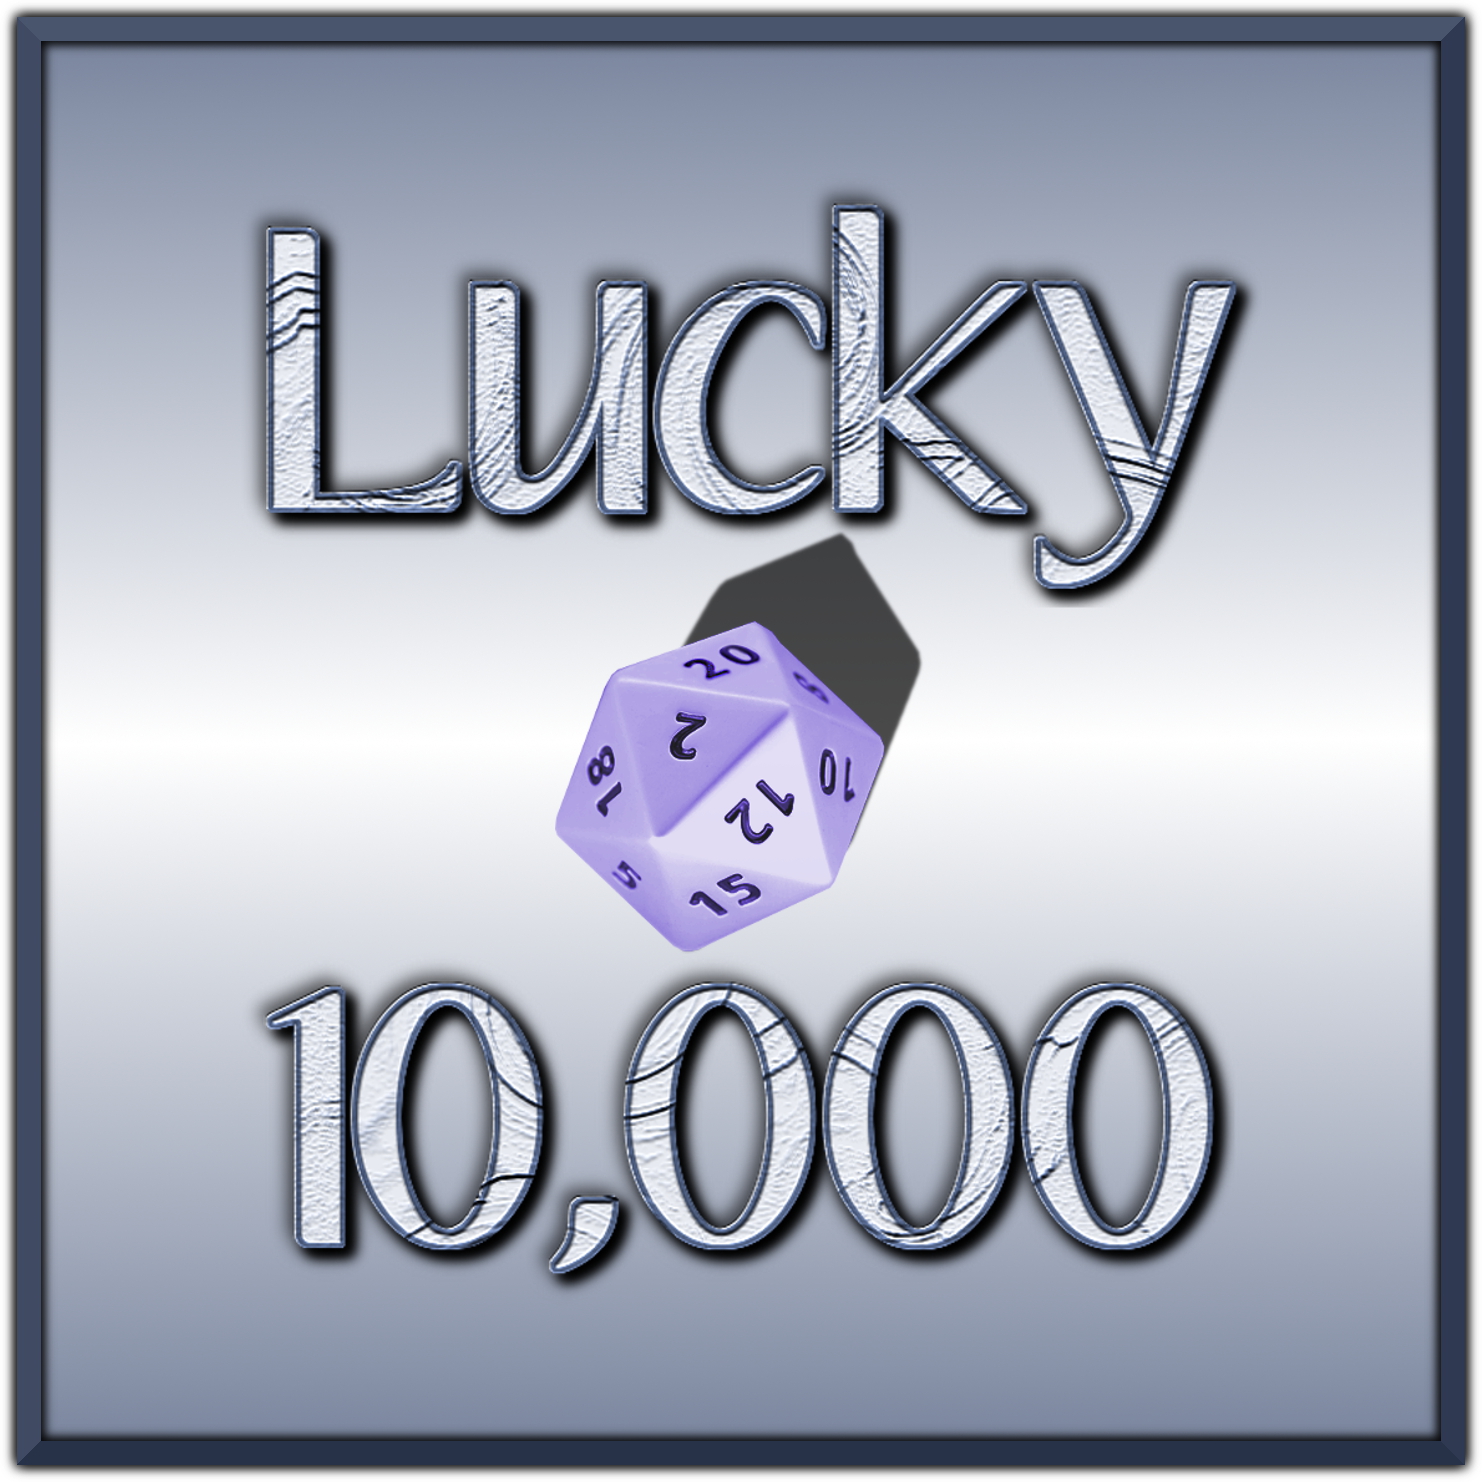 The Lucky Ten Thousand - Episode 41: Getting to Know You